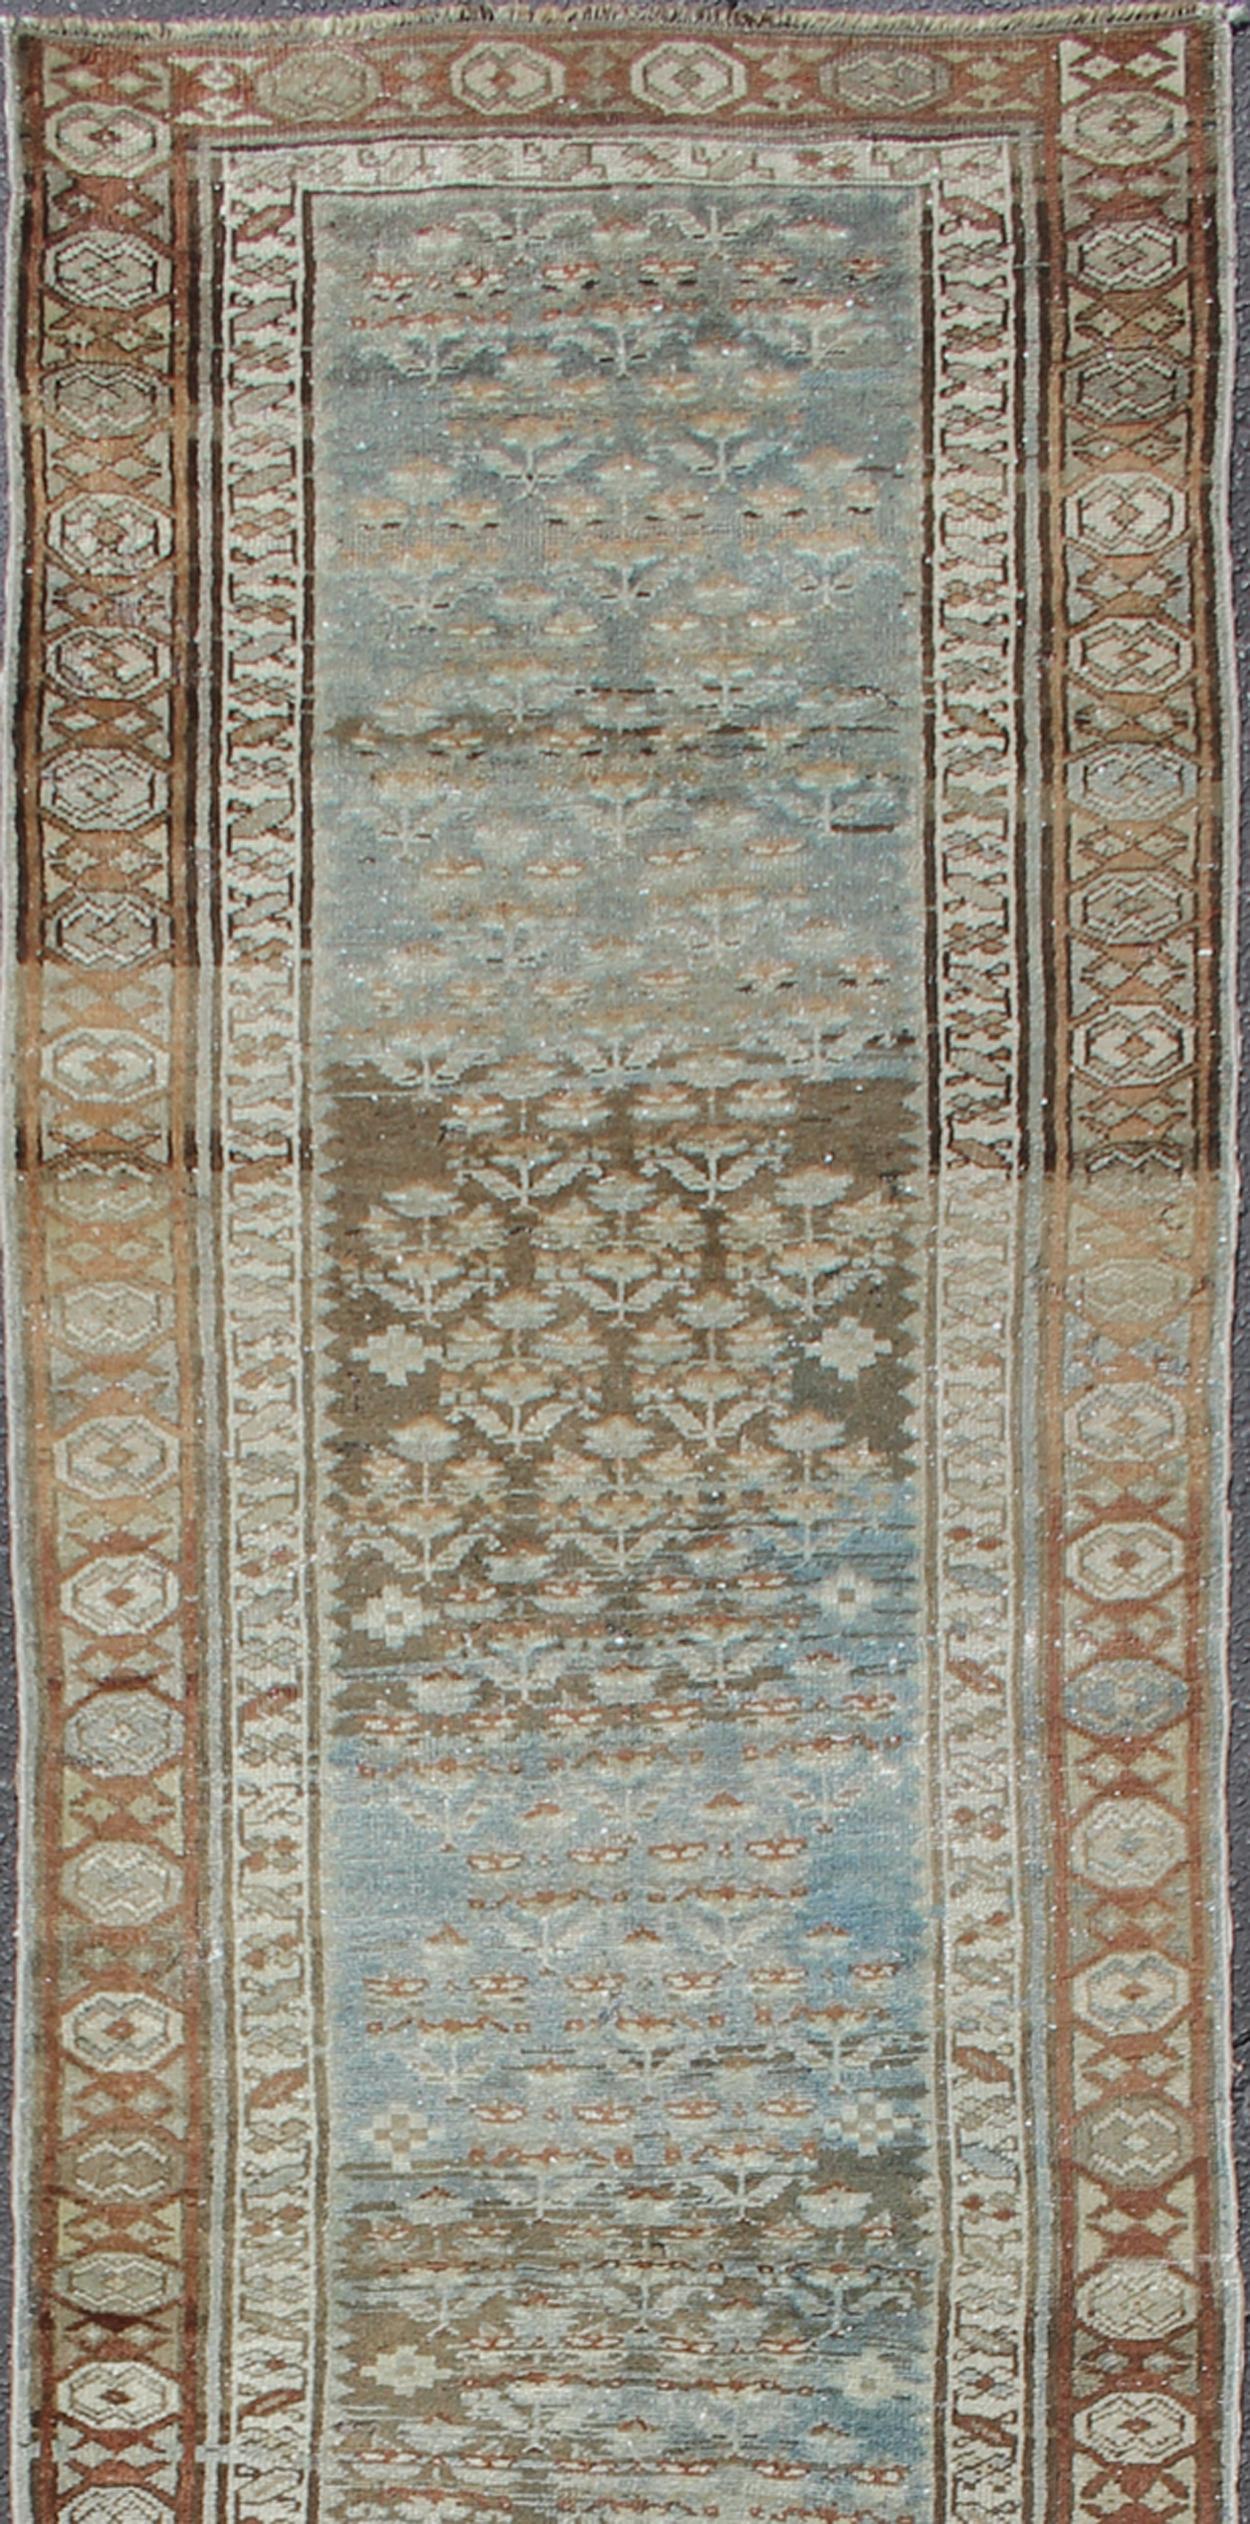 All-over geometric design antique Persian Malayer runner with blue and brown
Malayer antique runner from Persia with geometric design, rug 19-0201, country of origin / type: Iran / Malayer, circa 1920.

This antique Malayer runner from 1920s